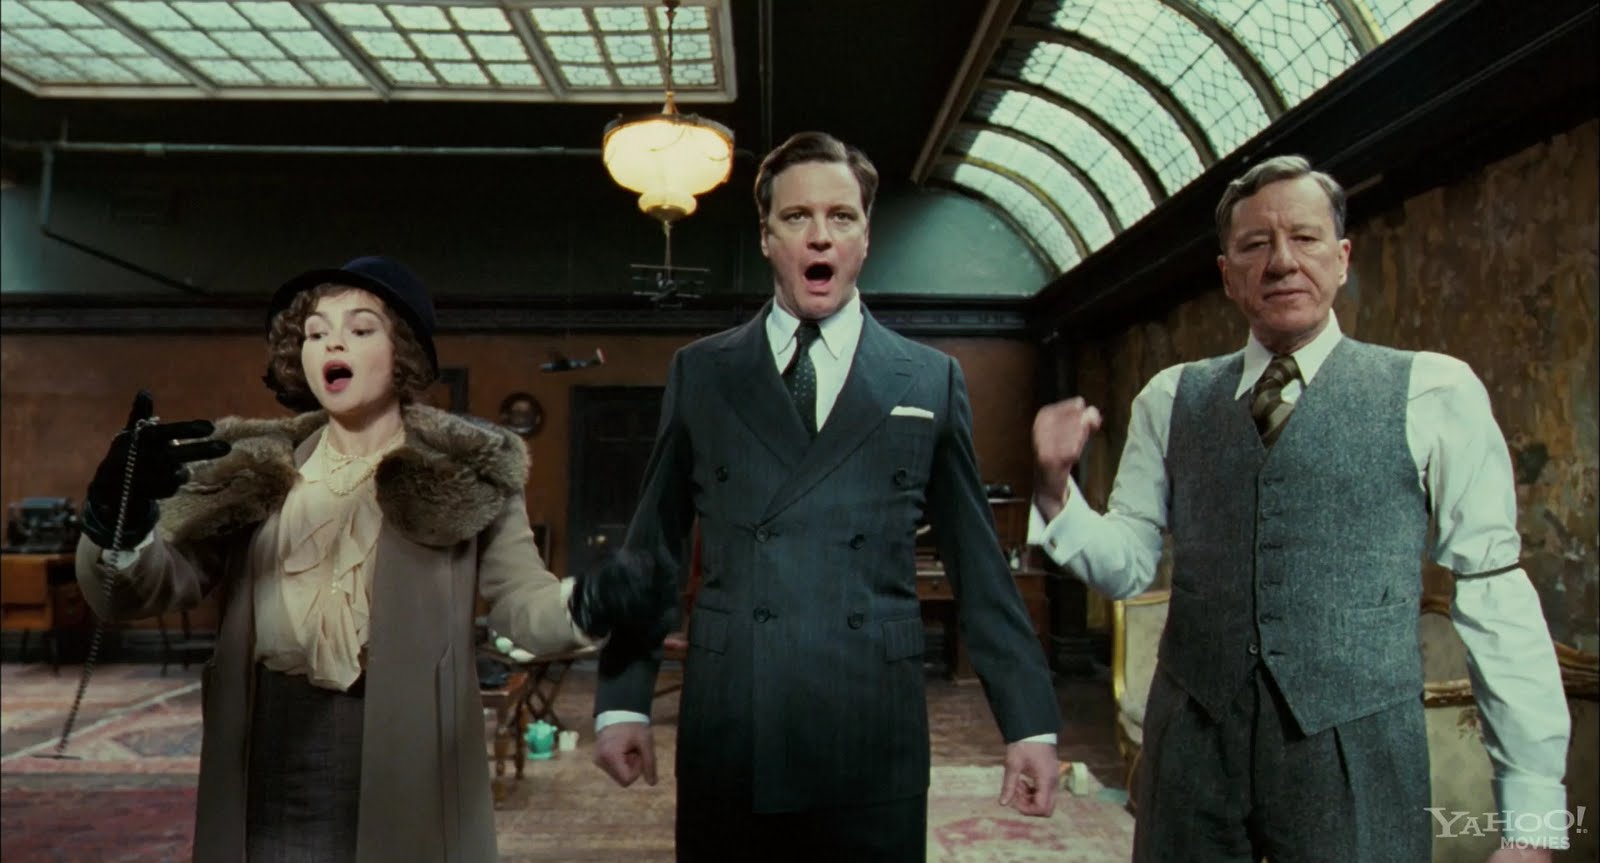 Still image from The King's Speech showing Queen Elizabeth, Prince Albert, and Lionel Logue doing speech exercises